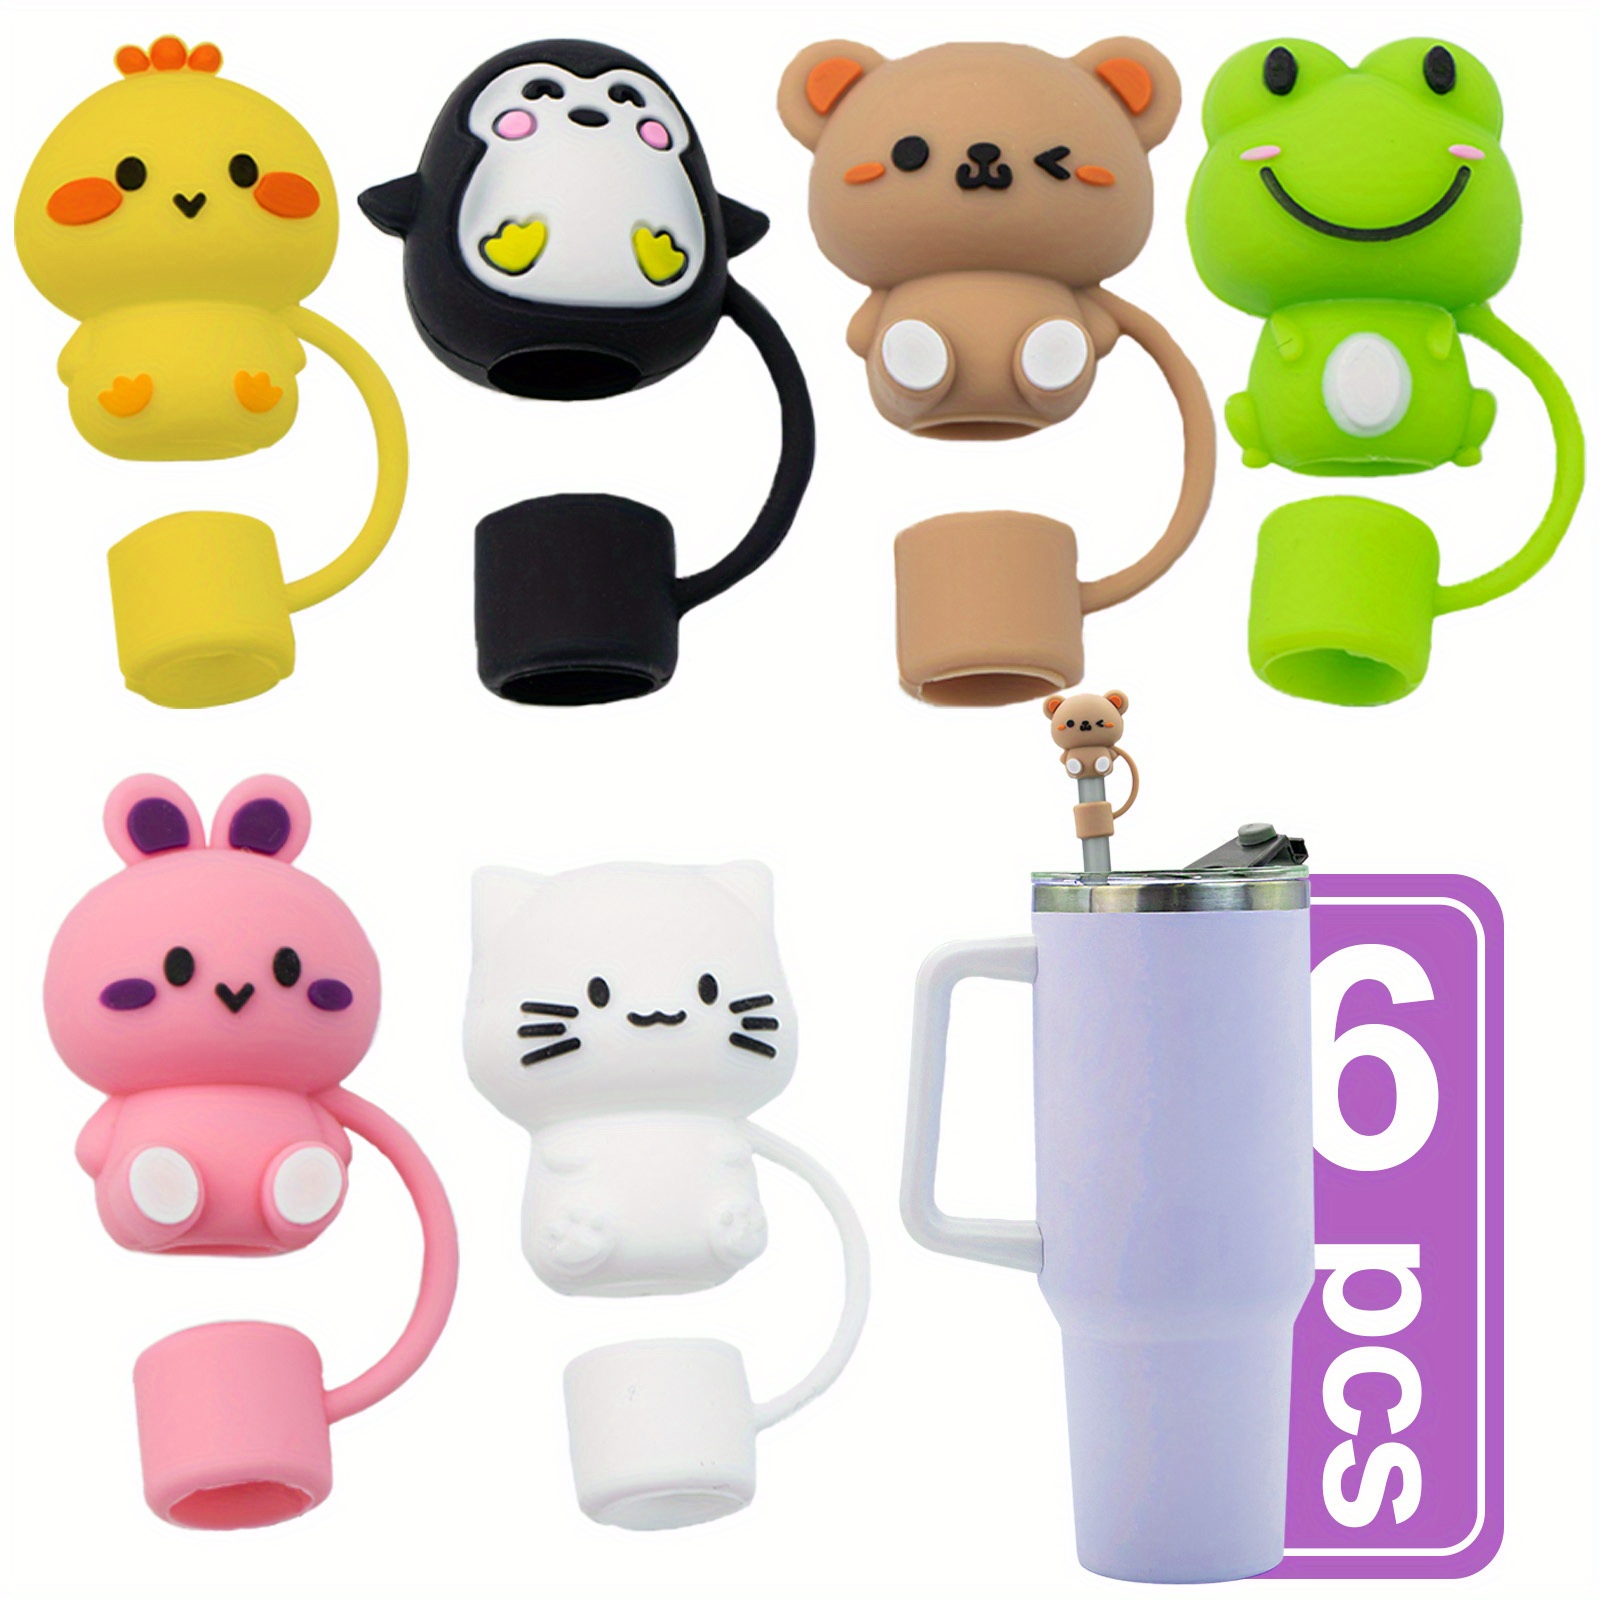 

6pcs/set Cute Animal Series Straw Plugs, Reusable Dustproof Silicone Straw Lids, Suitable For 10mm/0.39in Straws